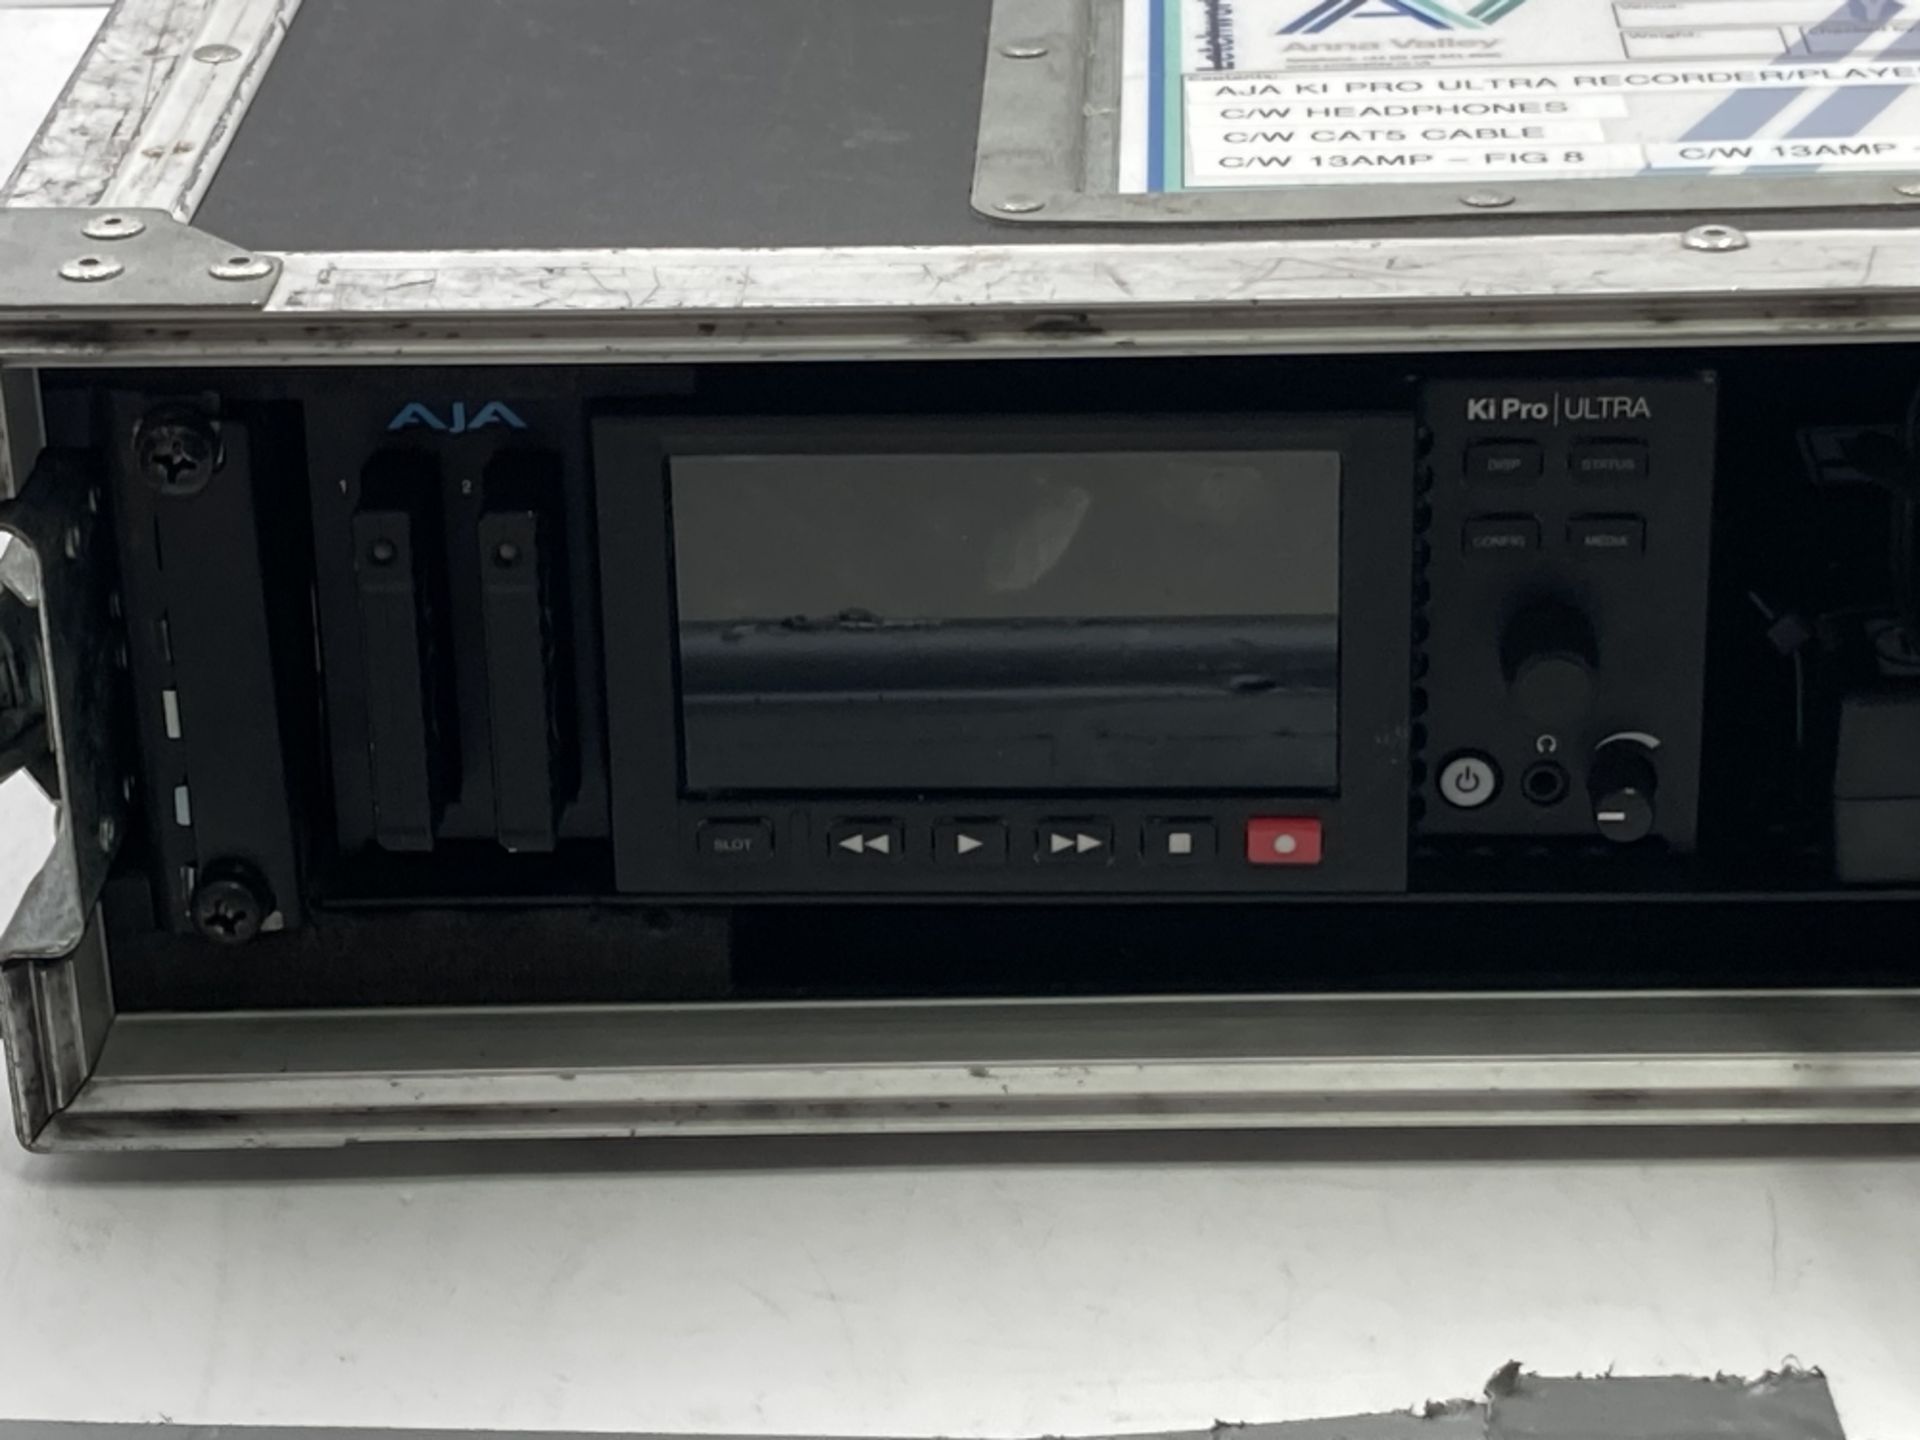 AJA KI Pro Ultra Recorder Player With Carrier Case - Image 2 of 8